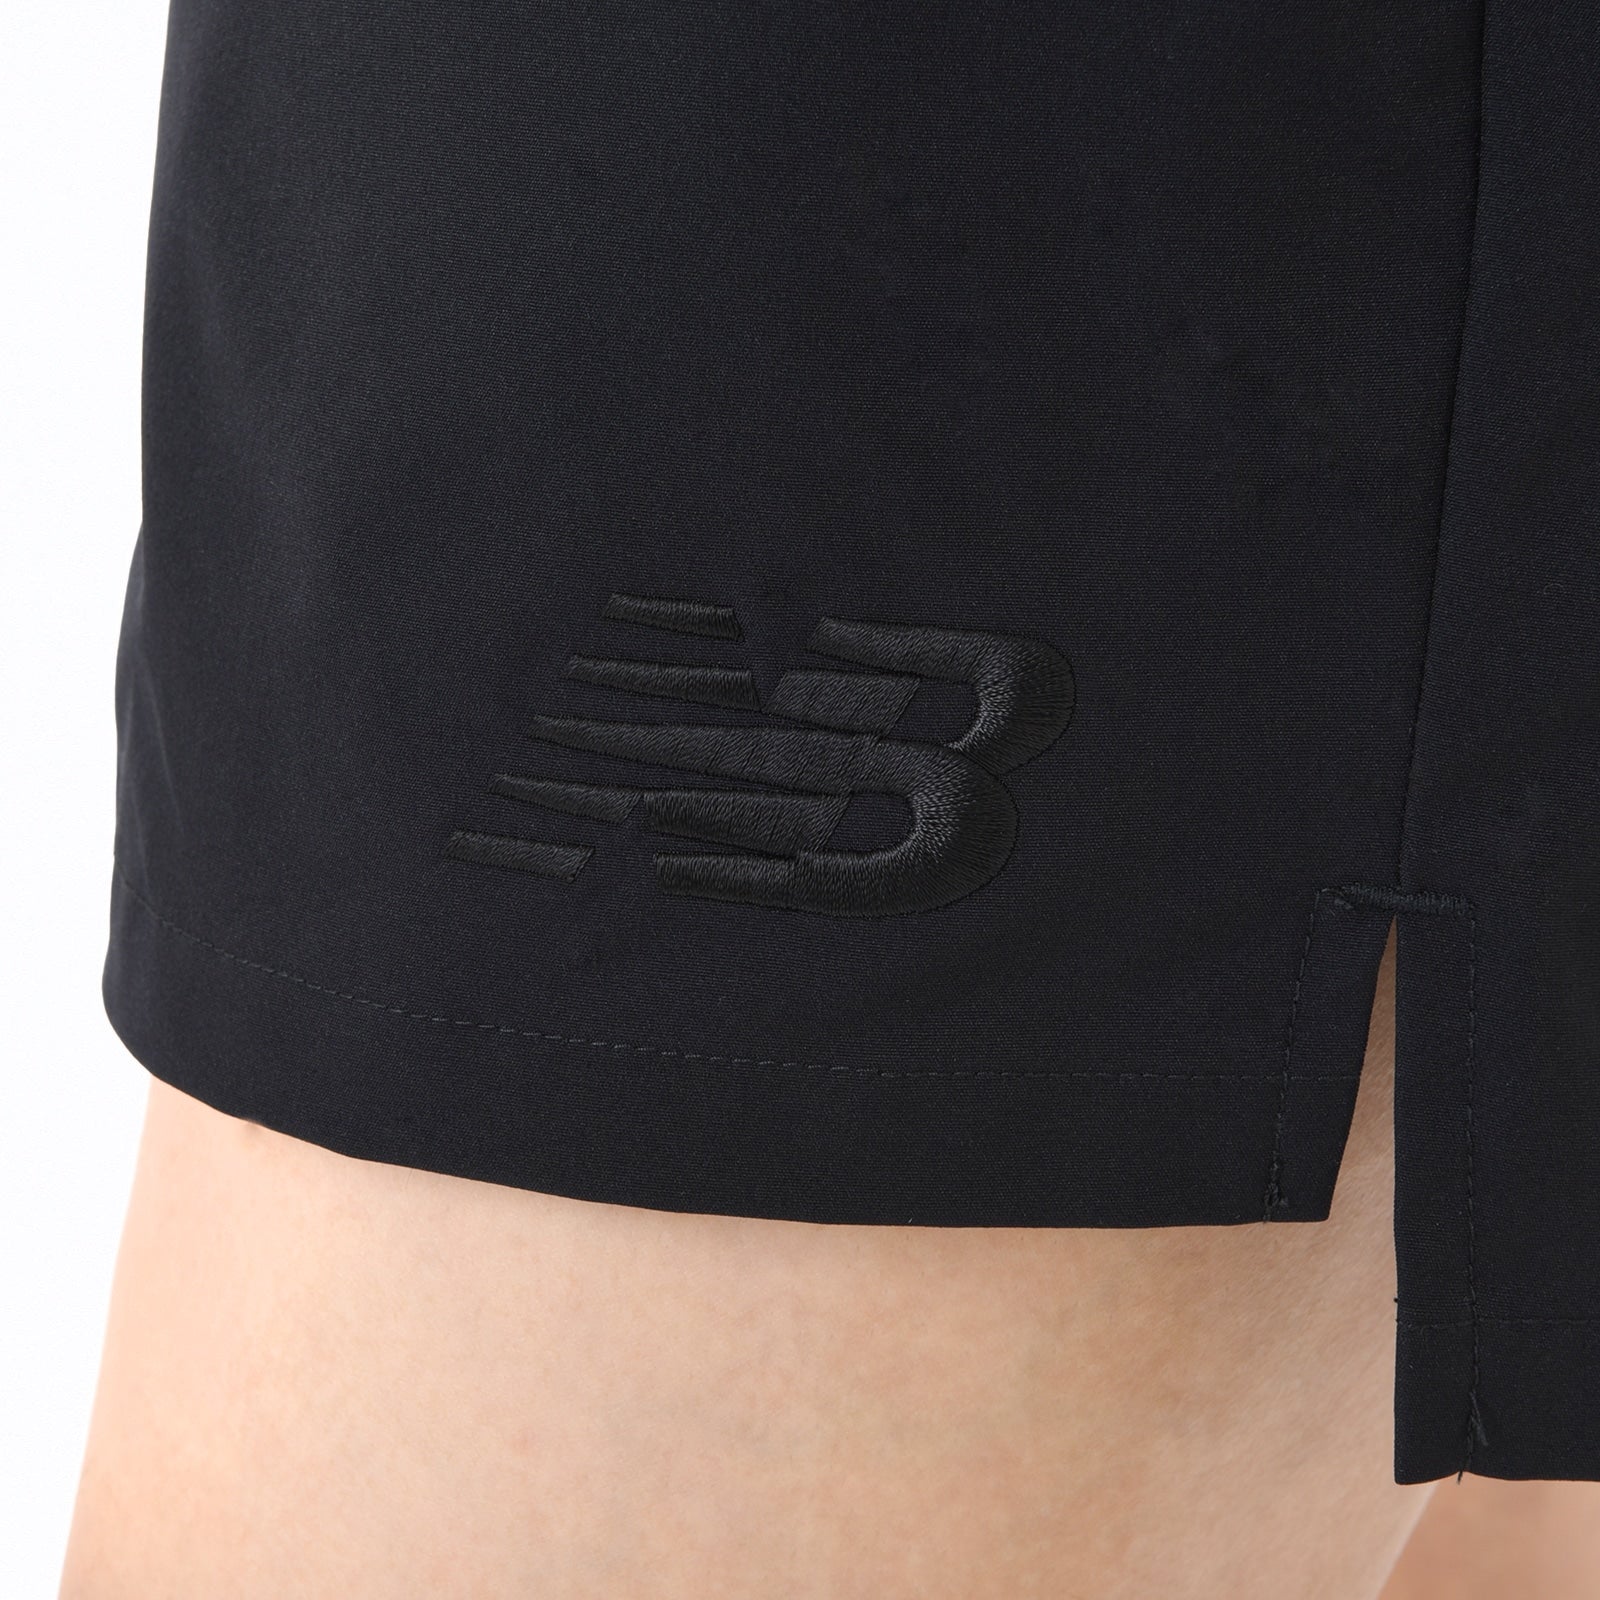 Black Out Collection Stretch Woven Shorts Right pocket only has a zipper